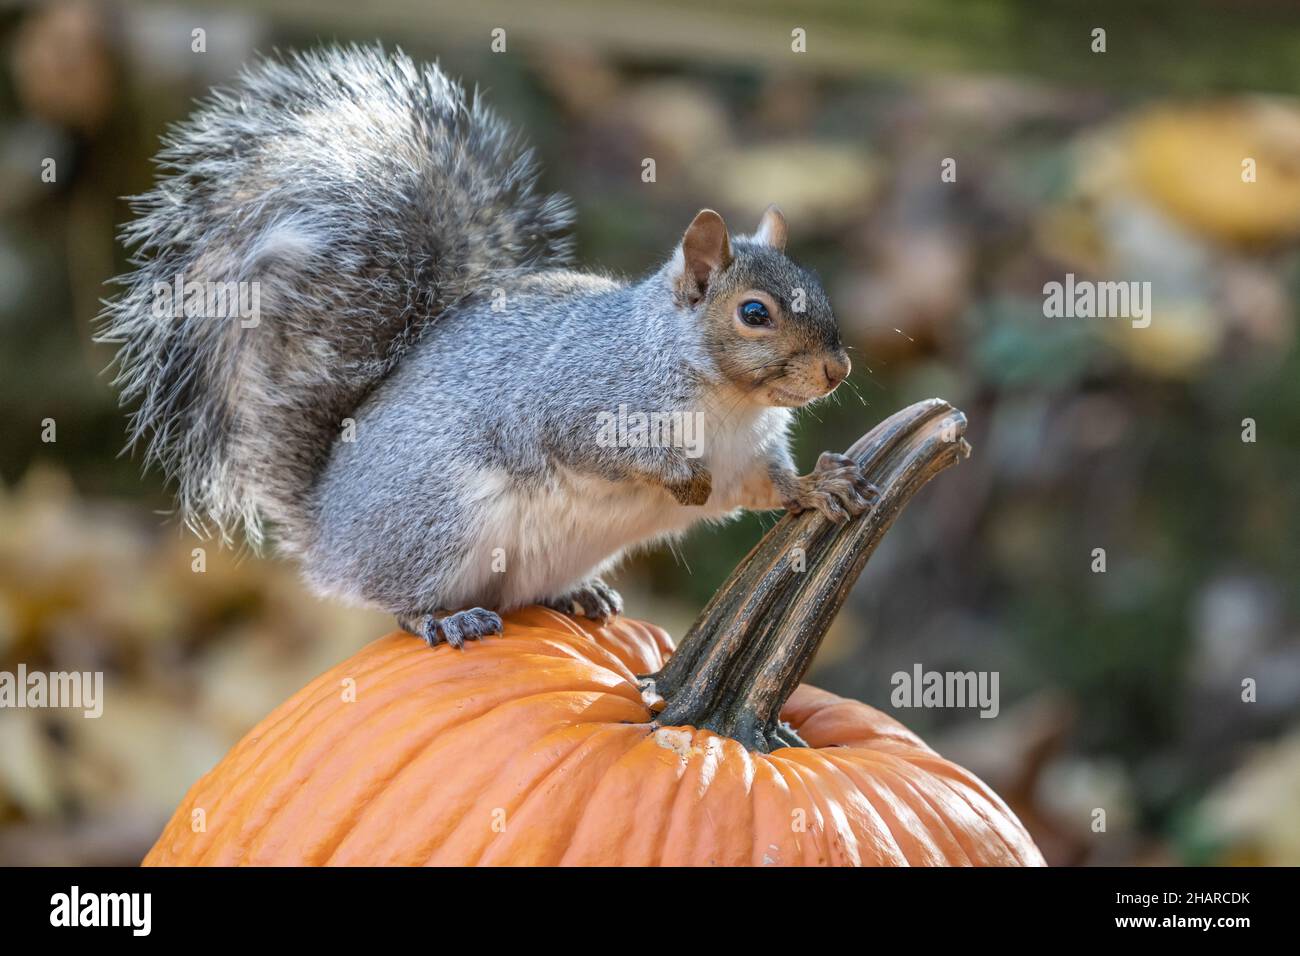 Close-up of Eastern Gray Squirrel sitting on pumpkin looking at camera. Stock Photo